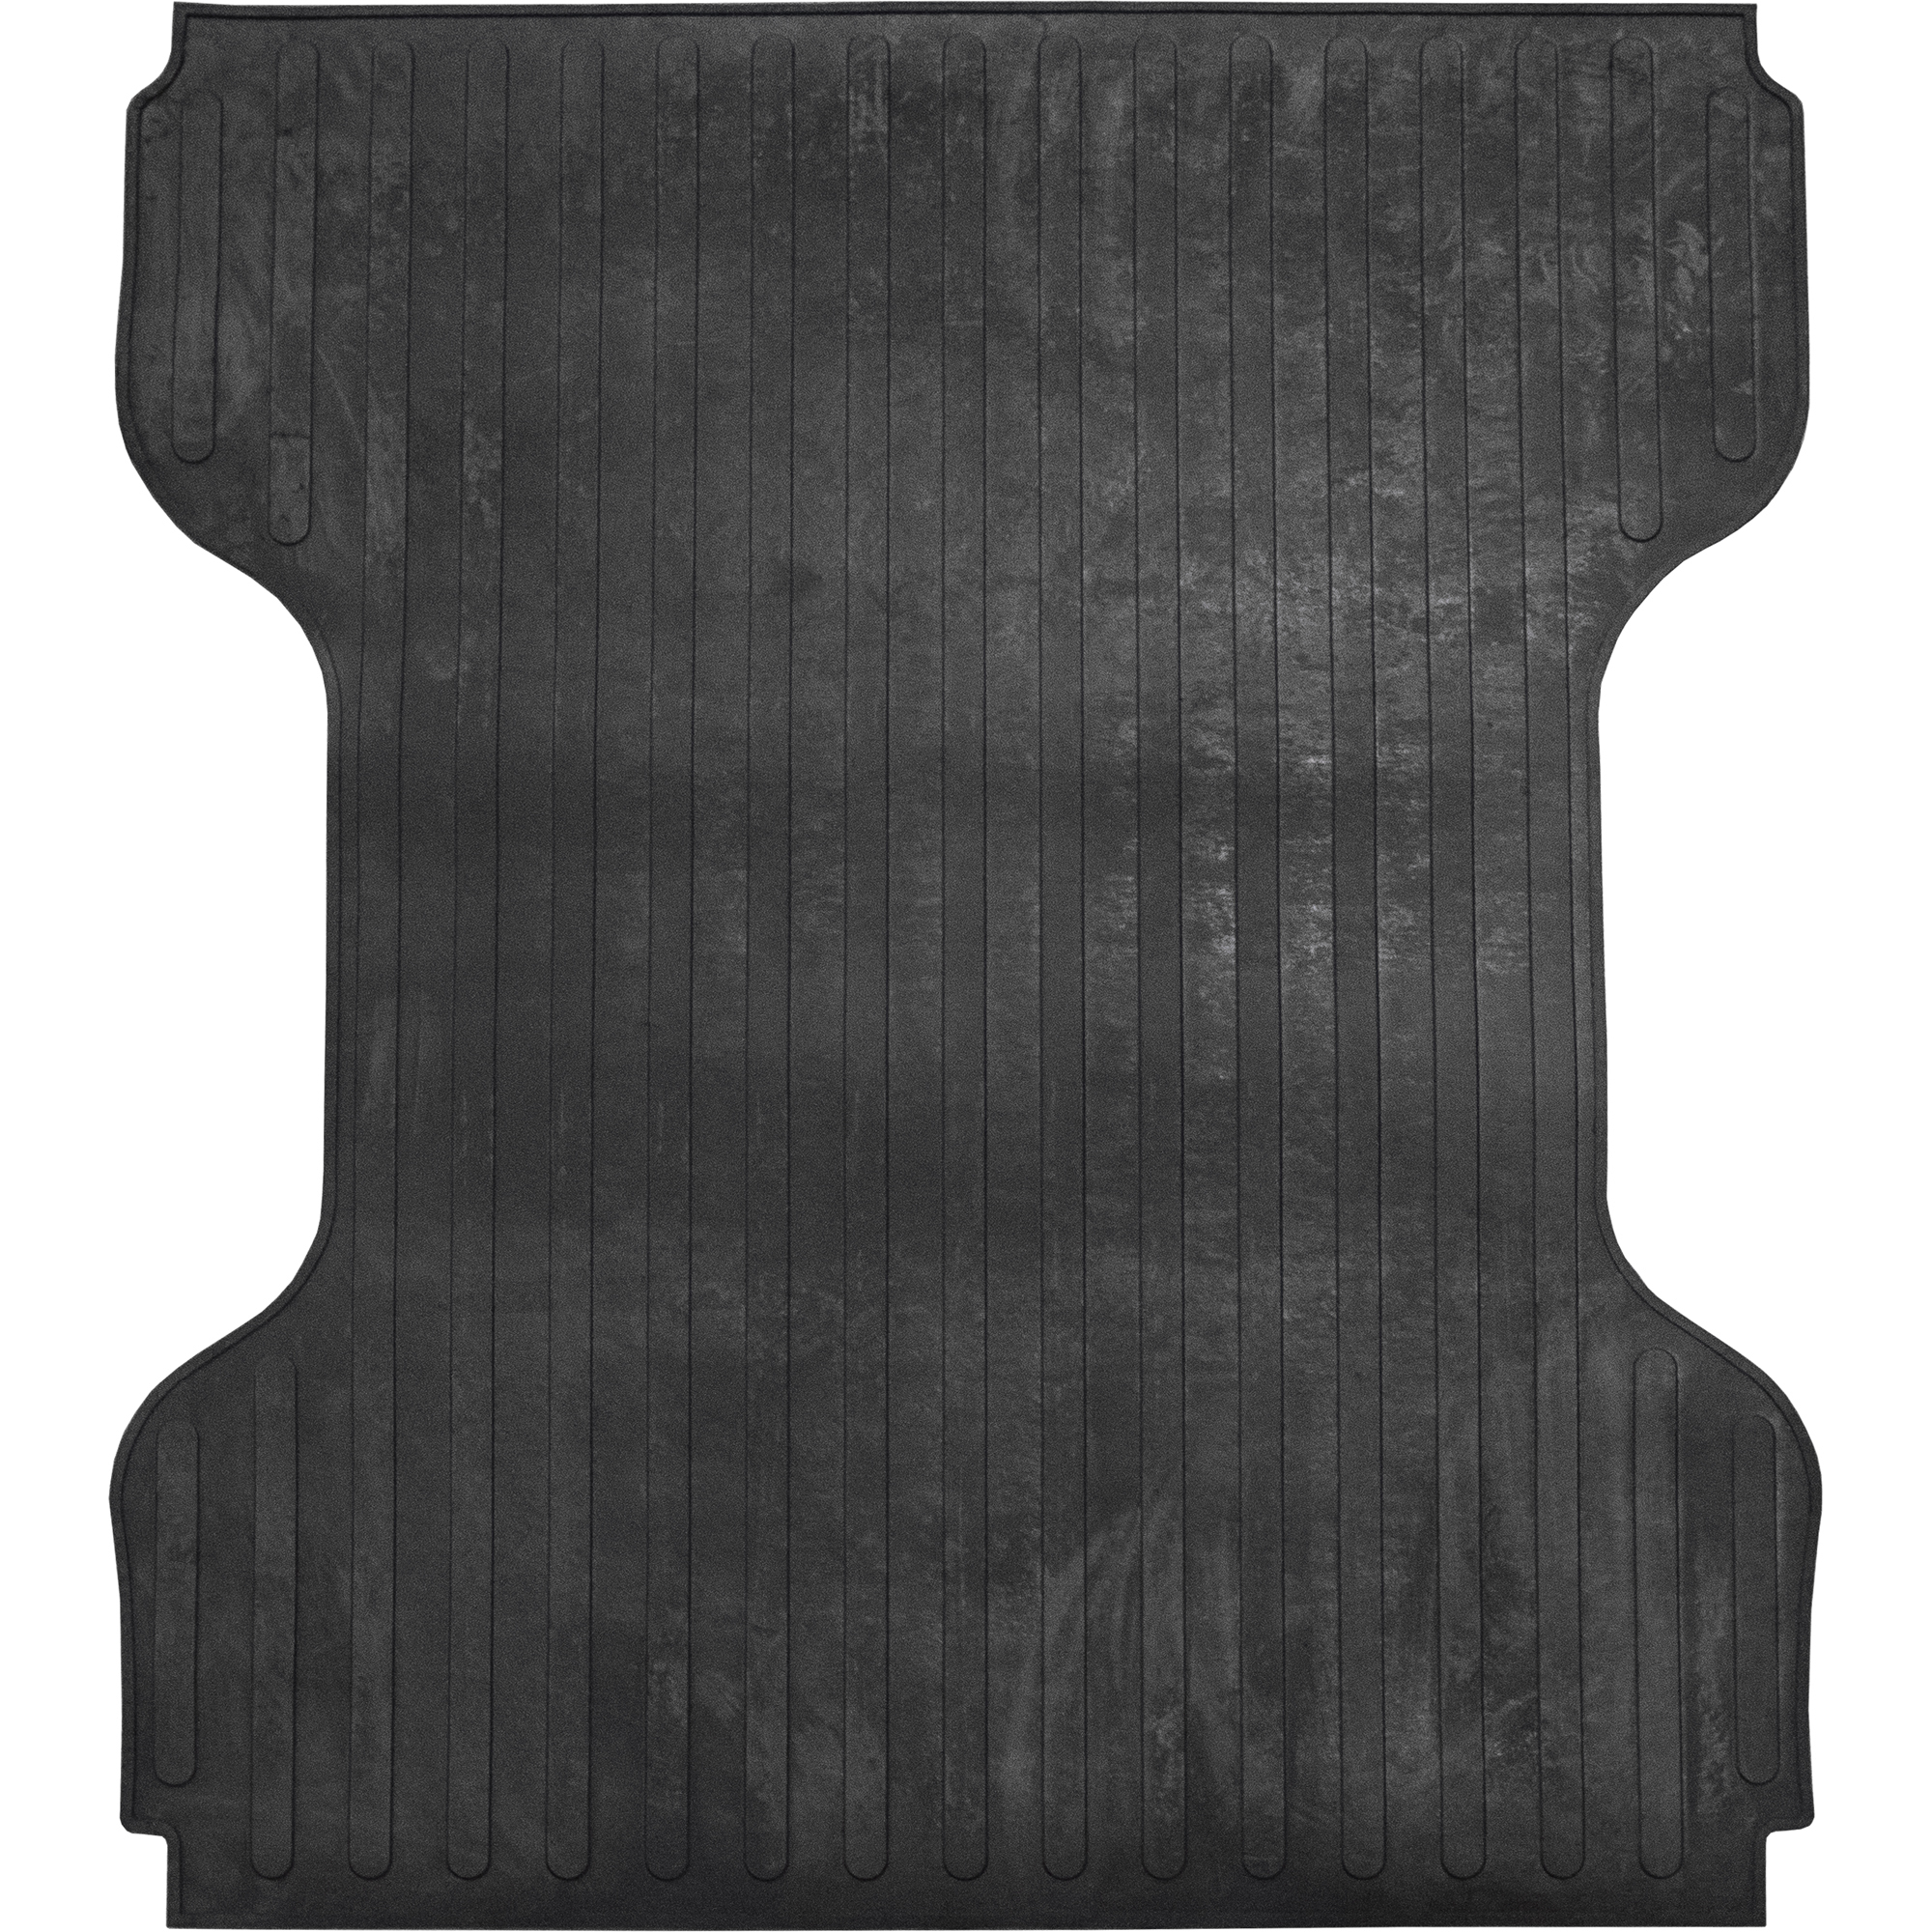 Boomerang Rubber, Toyota Tundra, Year 2007-2019 Bed Mat, Short Bed, 6.5ft. Long, Primary Color Black, Model TM619BAGGED